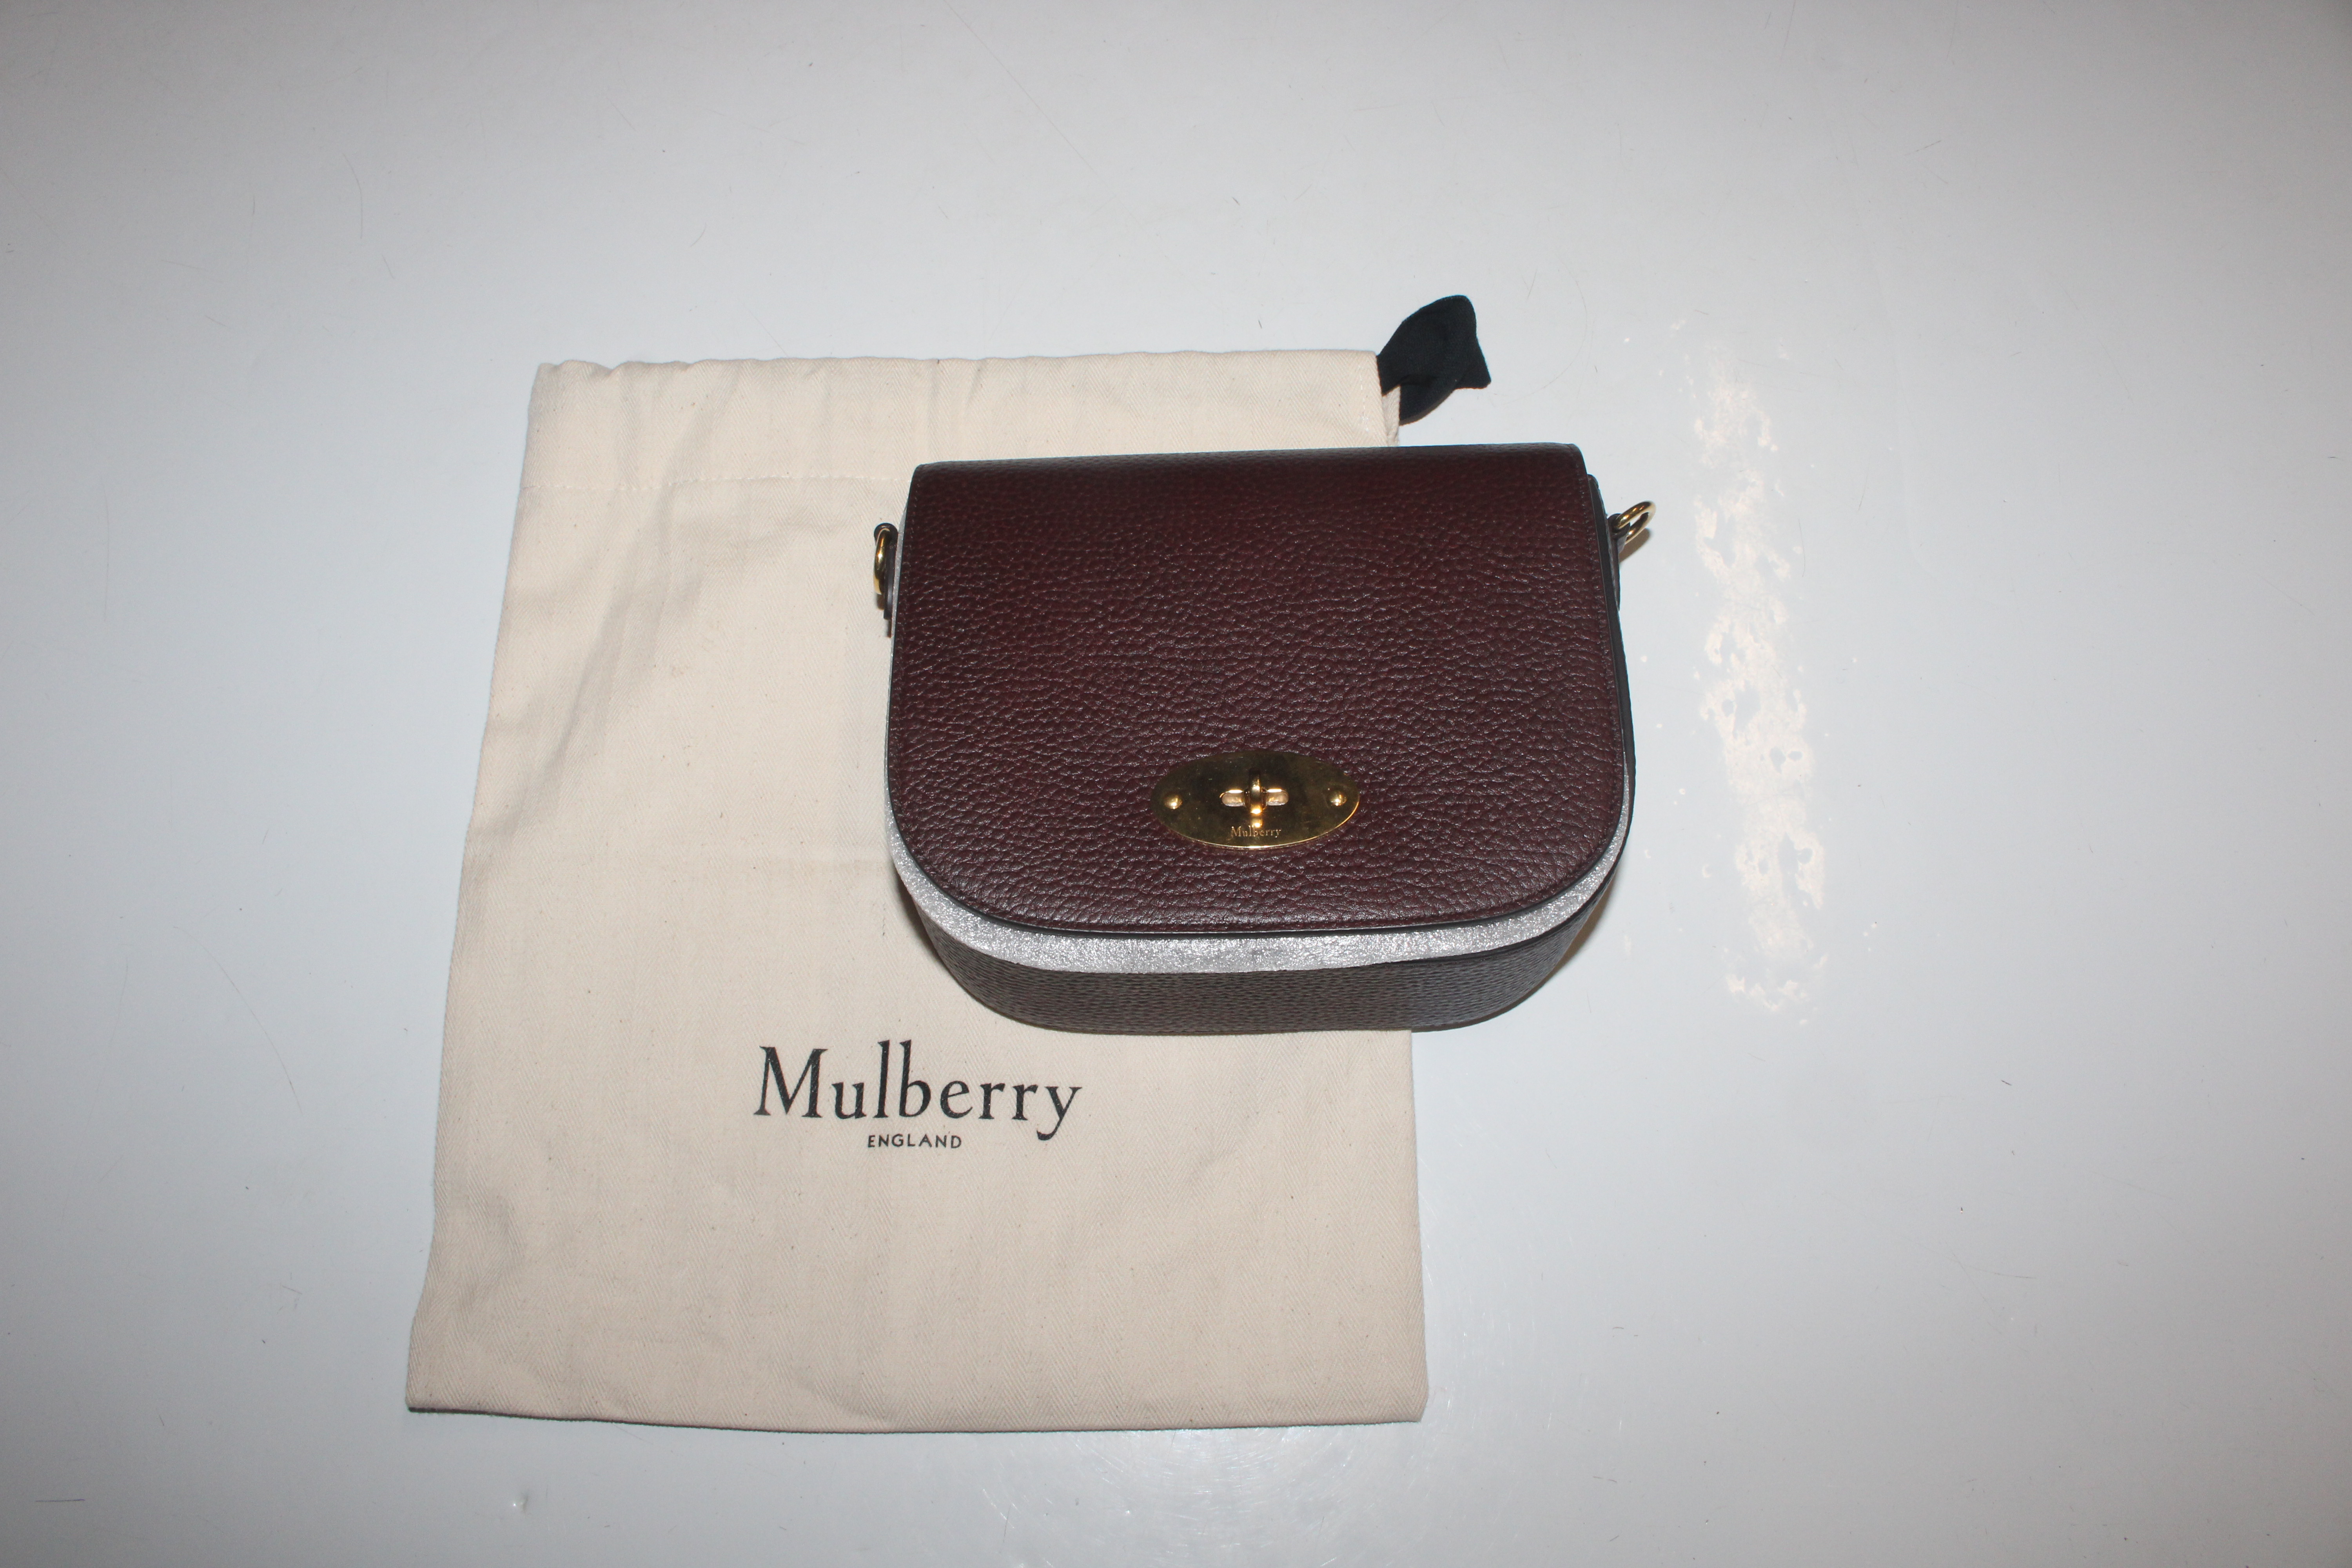 A Mulberry wine leather small Darley satchel bag